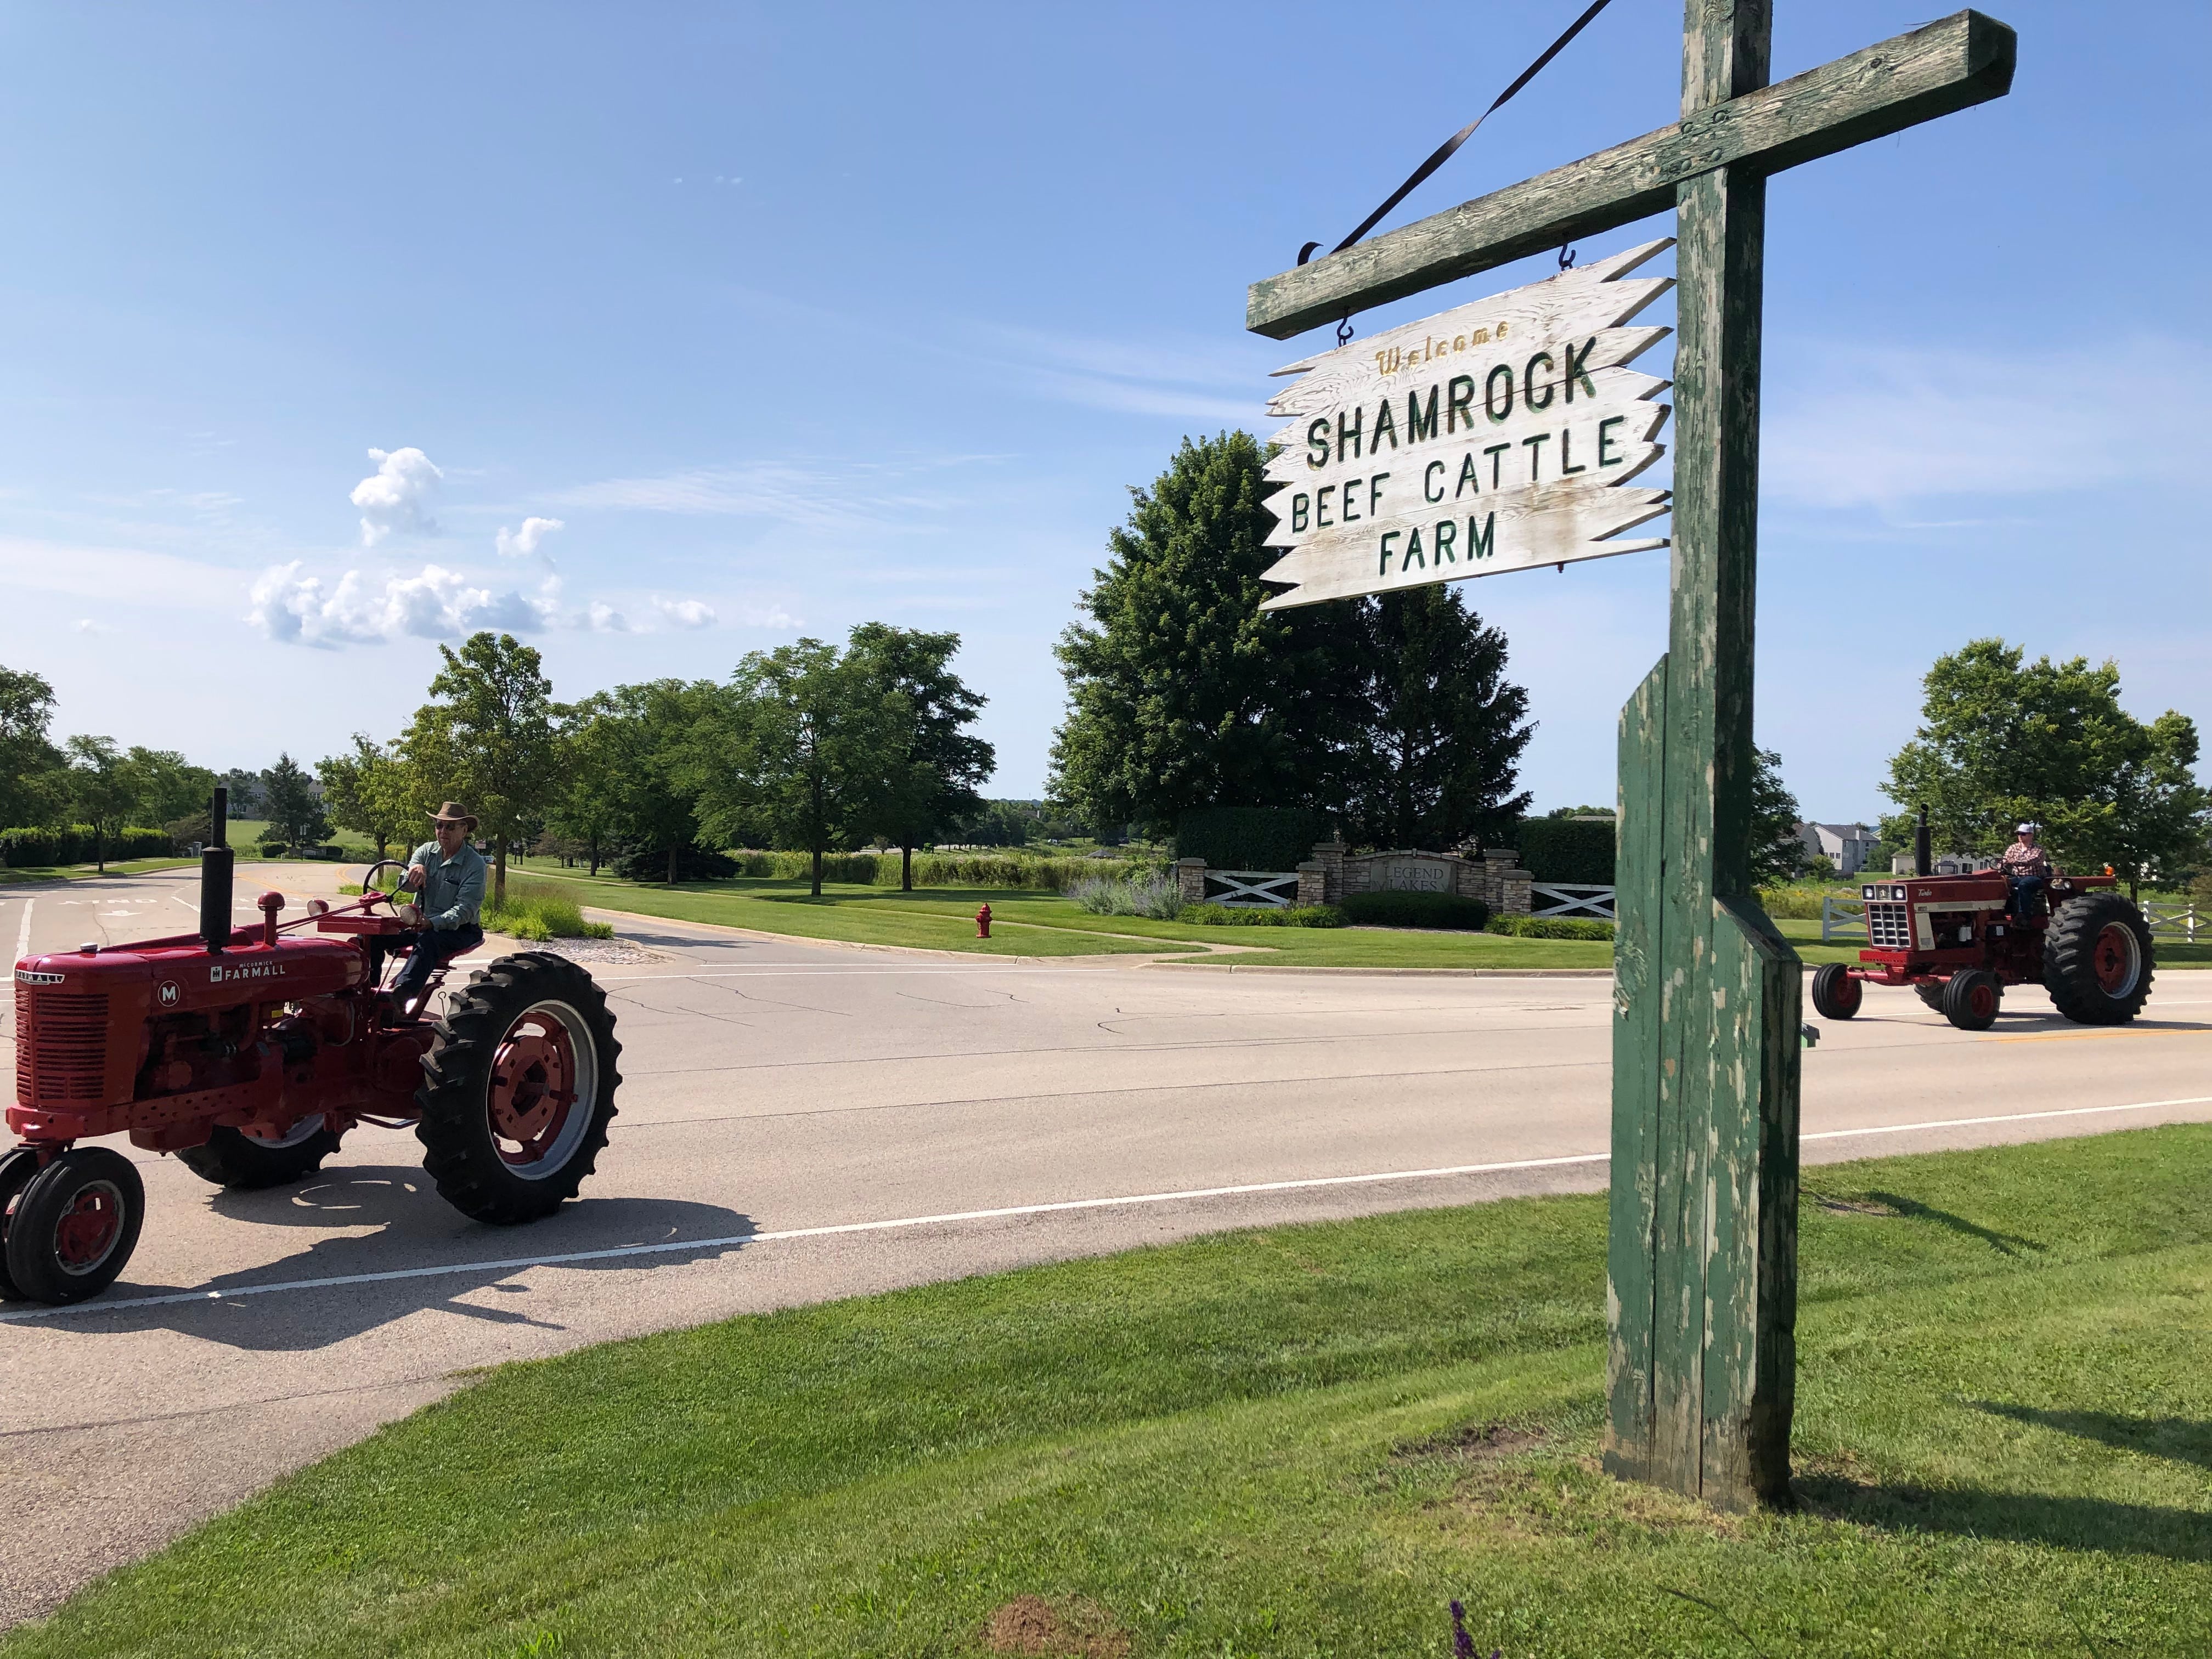 Pleasant weather, scenery highlight McHenry County Tractor Trek